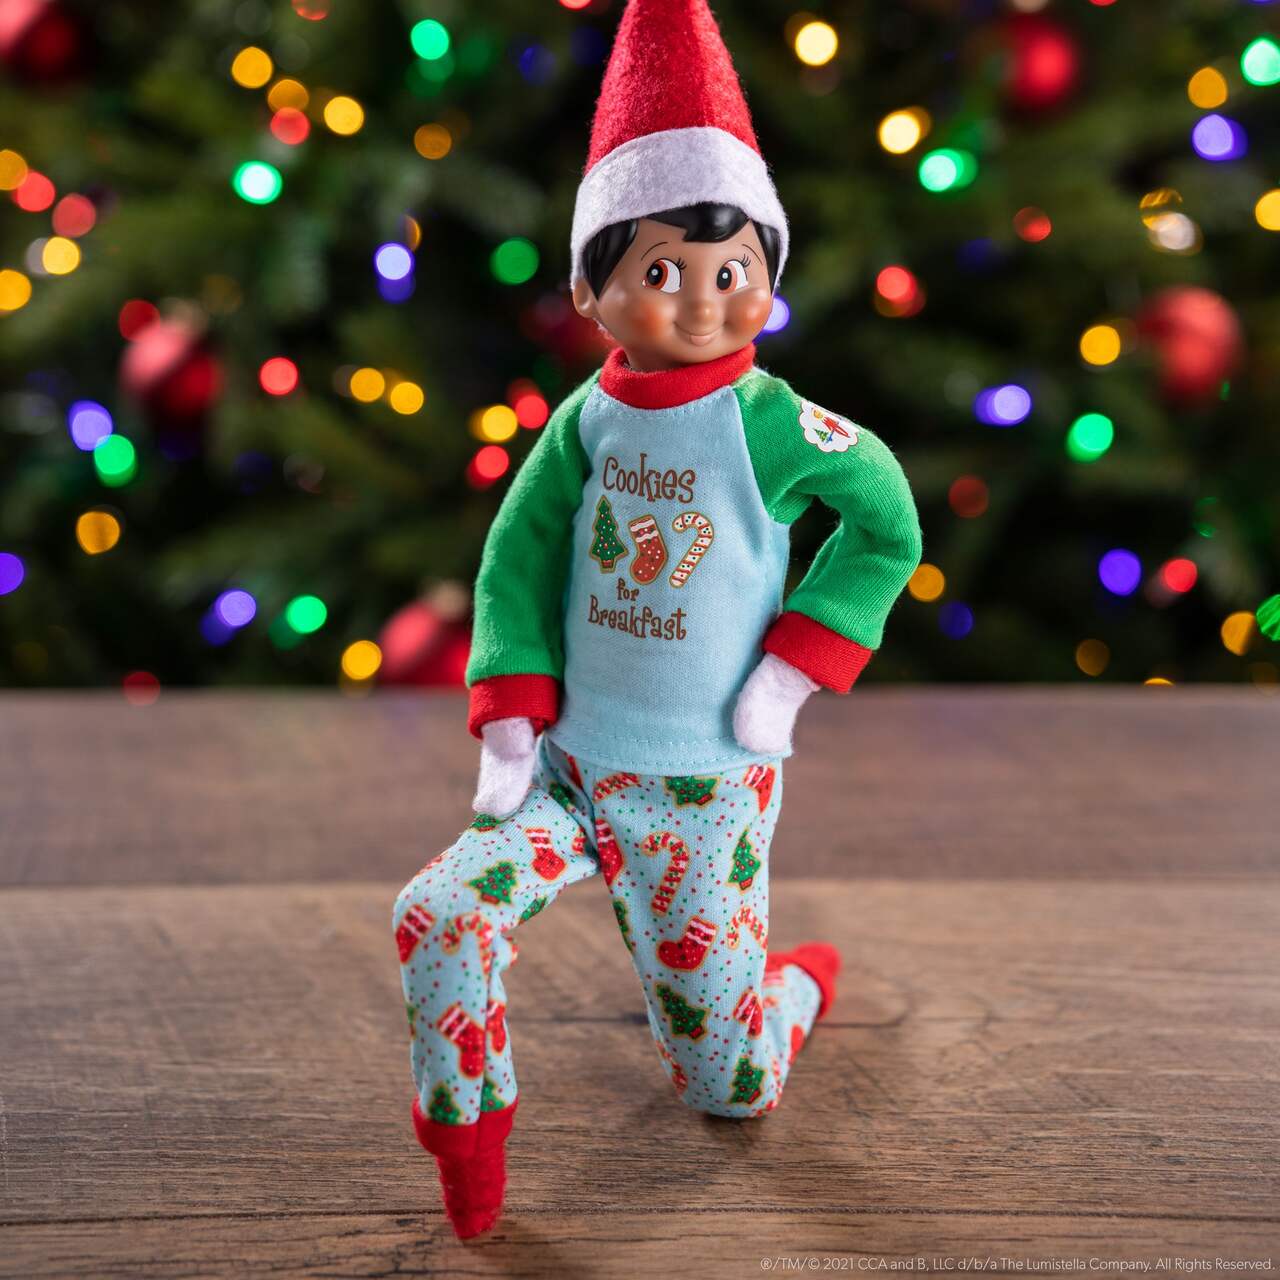 https://media-www.canadiantire.ca/product/seasonal-gardening/seasonal/christmas-indoor-decor/1519124/elf-couture-pajamas-e725a2fe-a244-4713-a497-8cf7a75b72fb-jpgrendition.jpg?imdensity=1&imwidth=1244&impolicy=mZoom